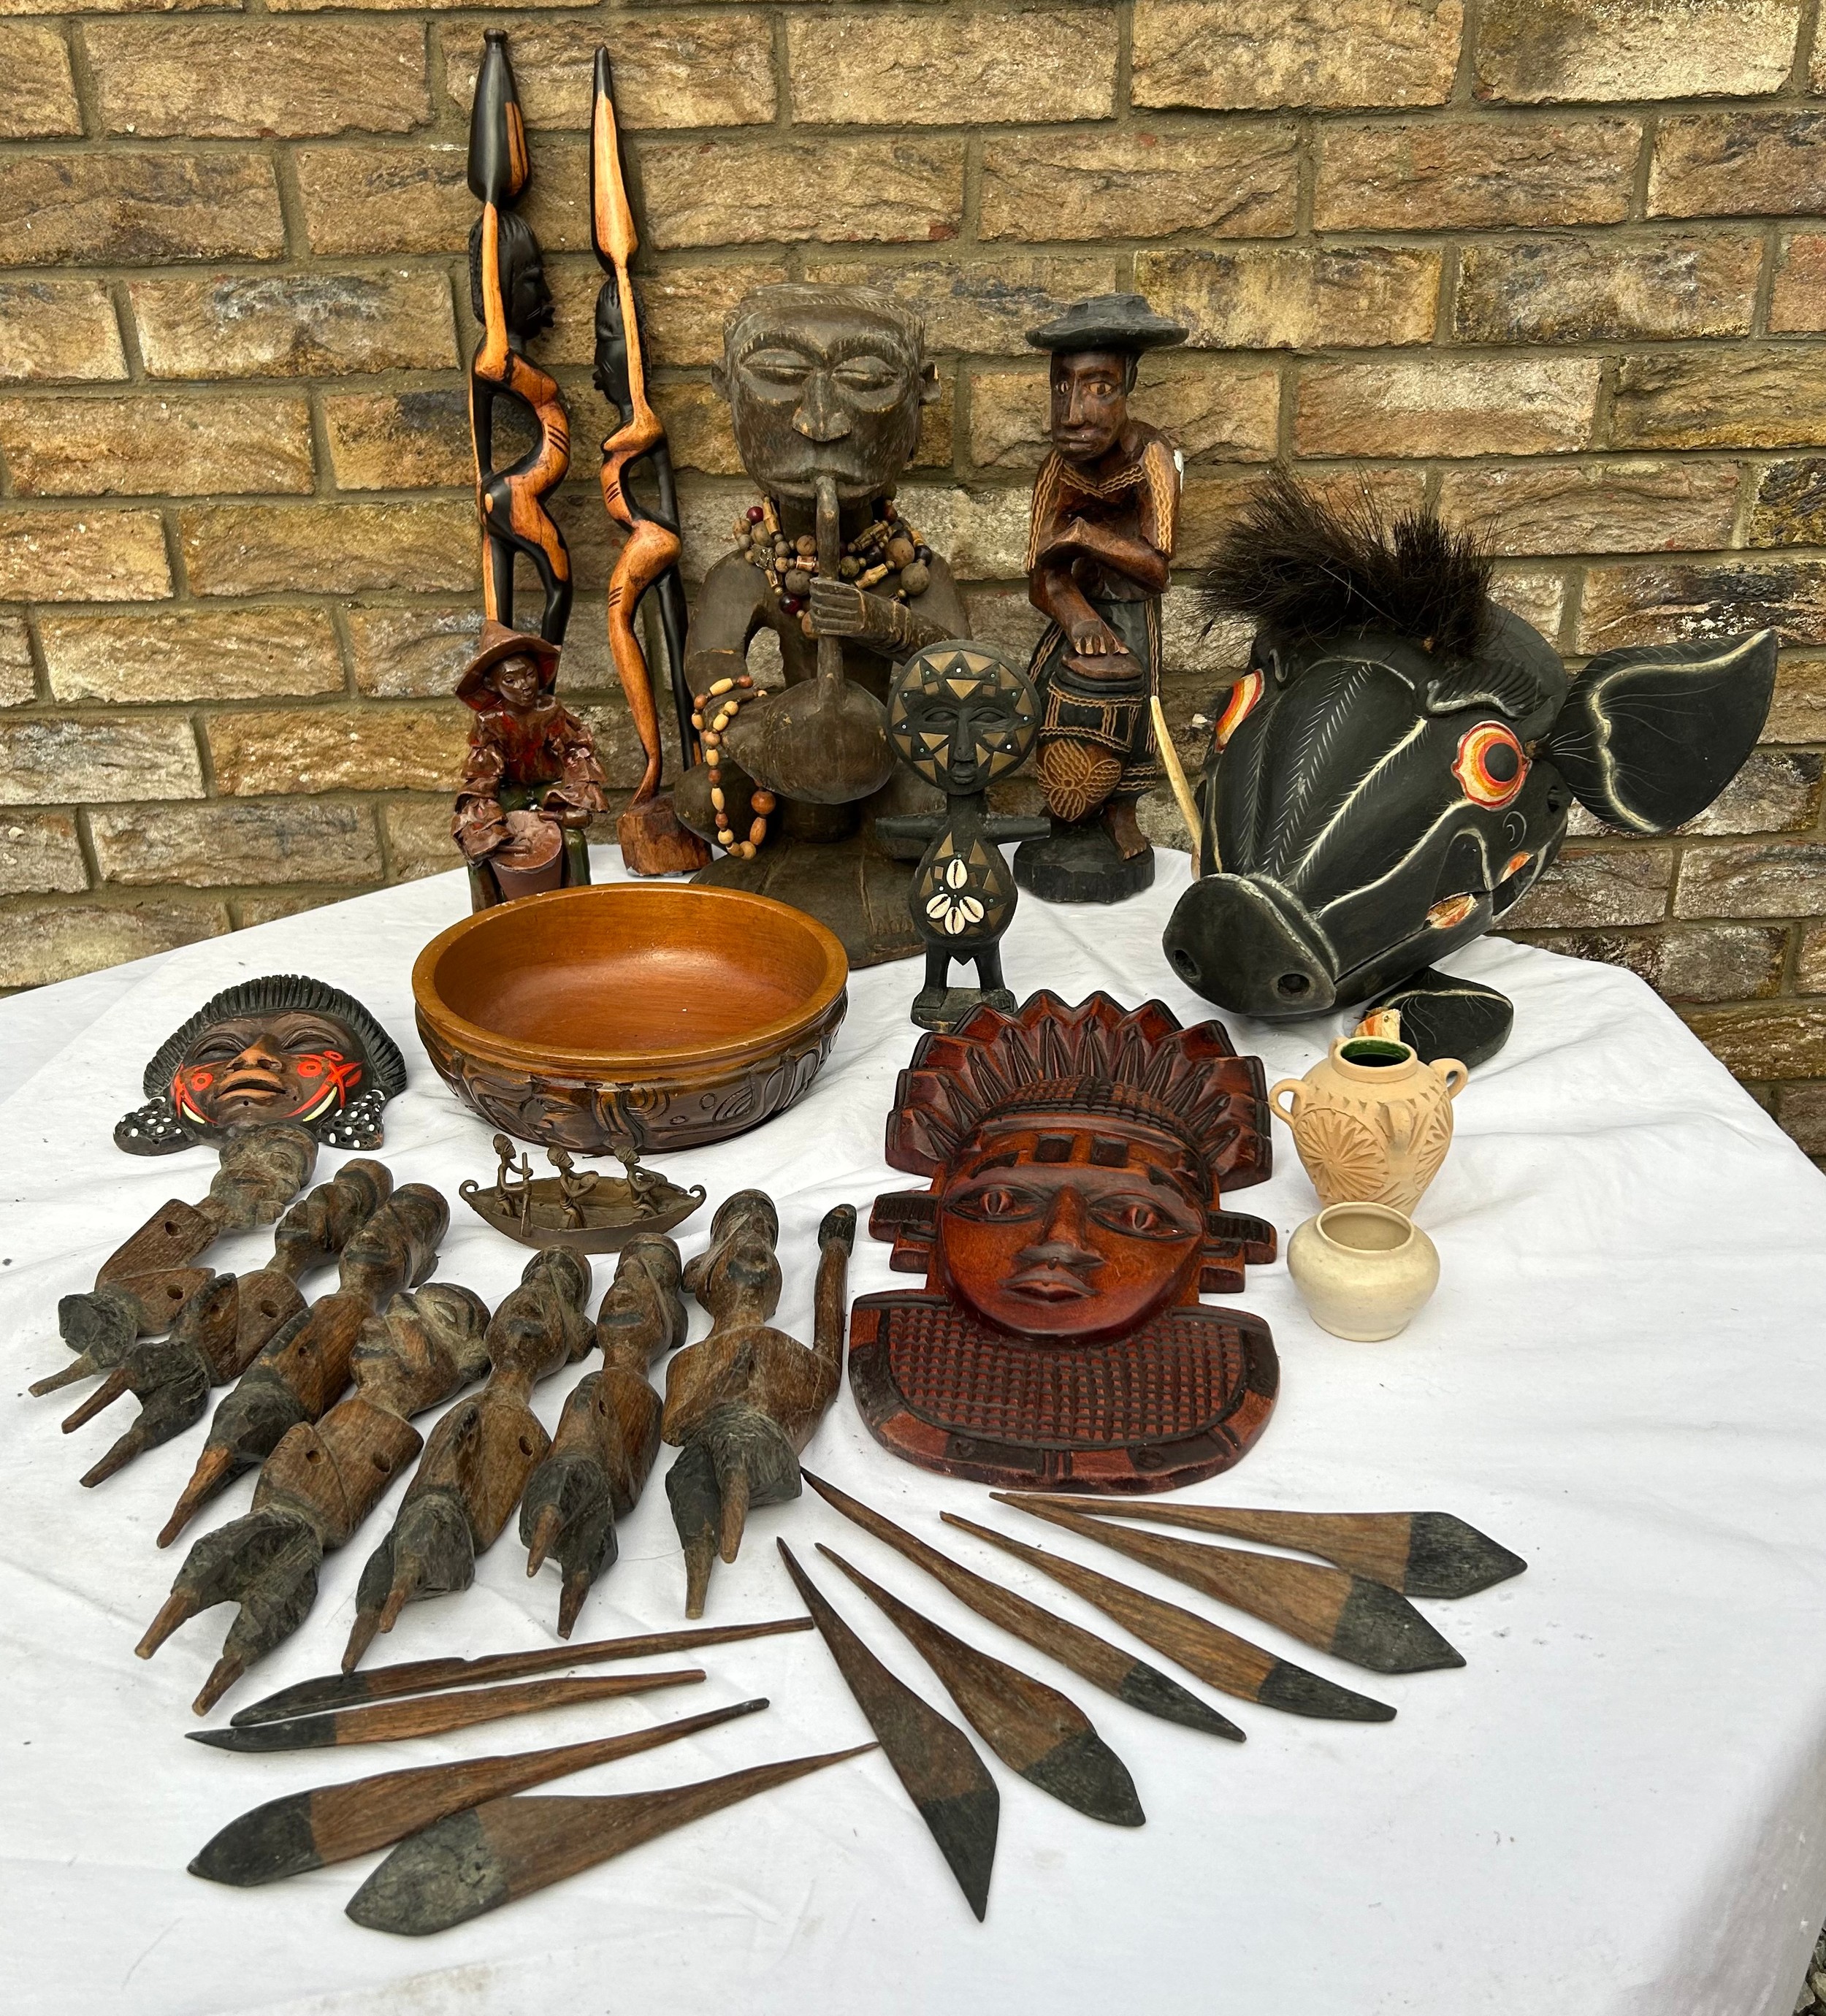 An unusual lot of tribal wooden items to include a wooden painted boar, wooden figures and mask wall